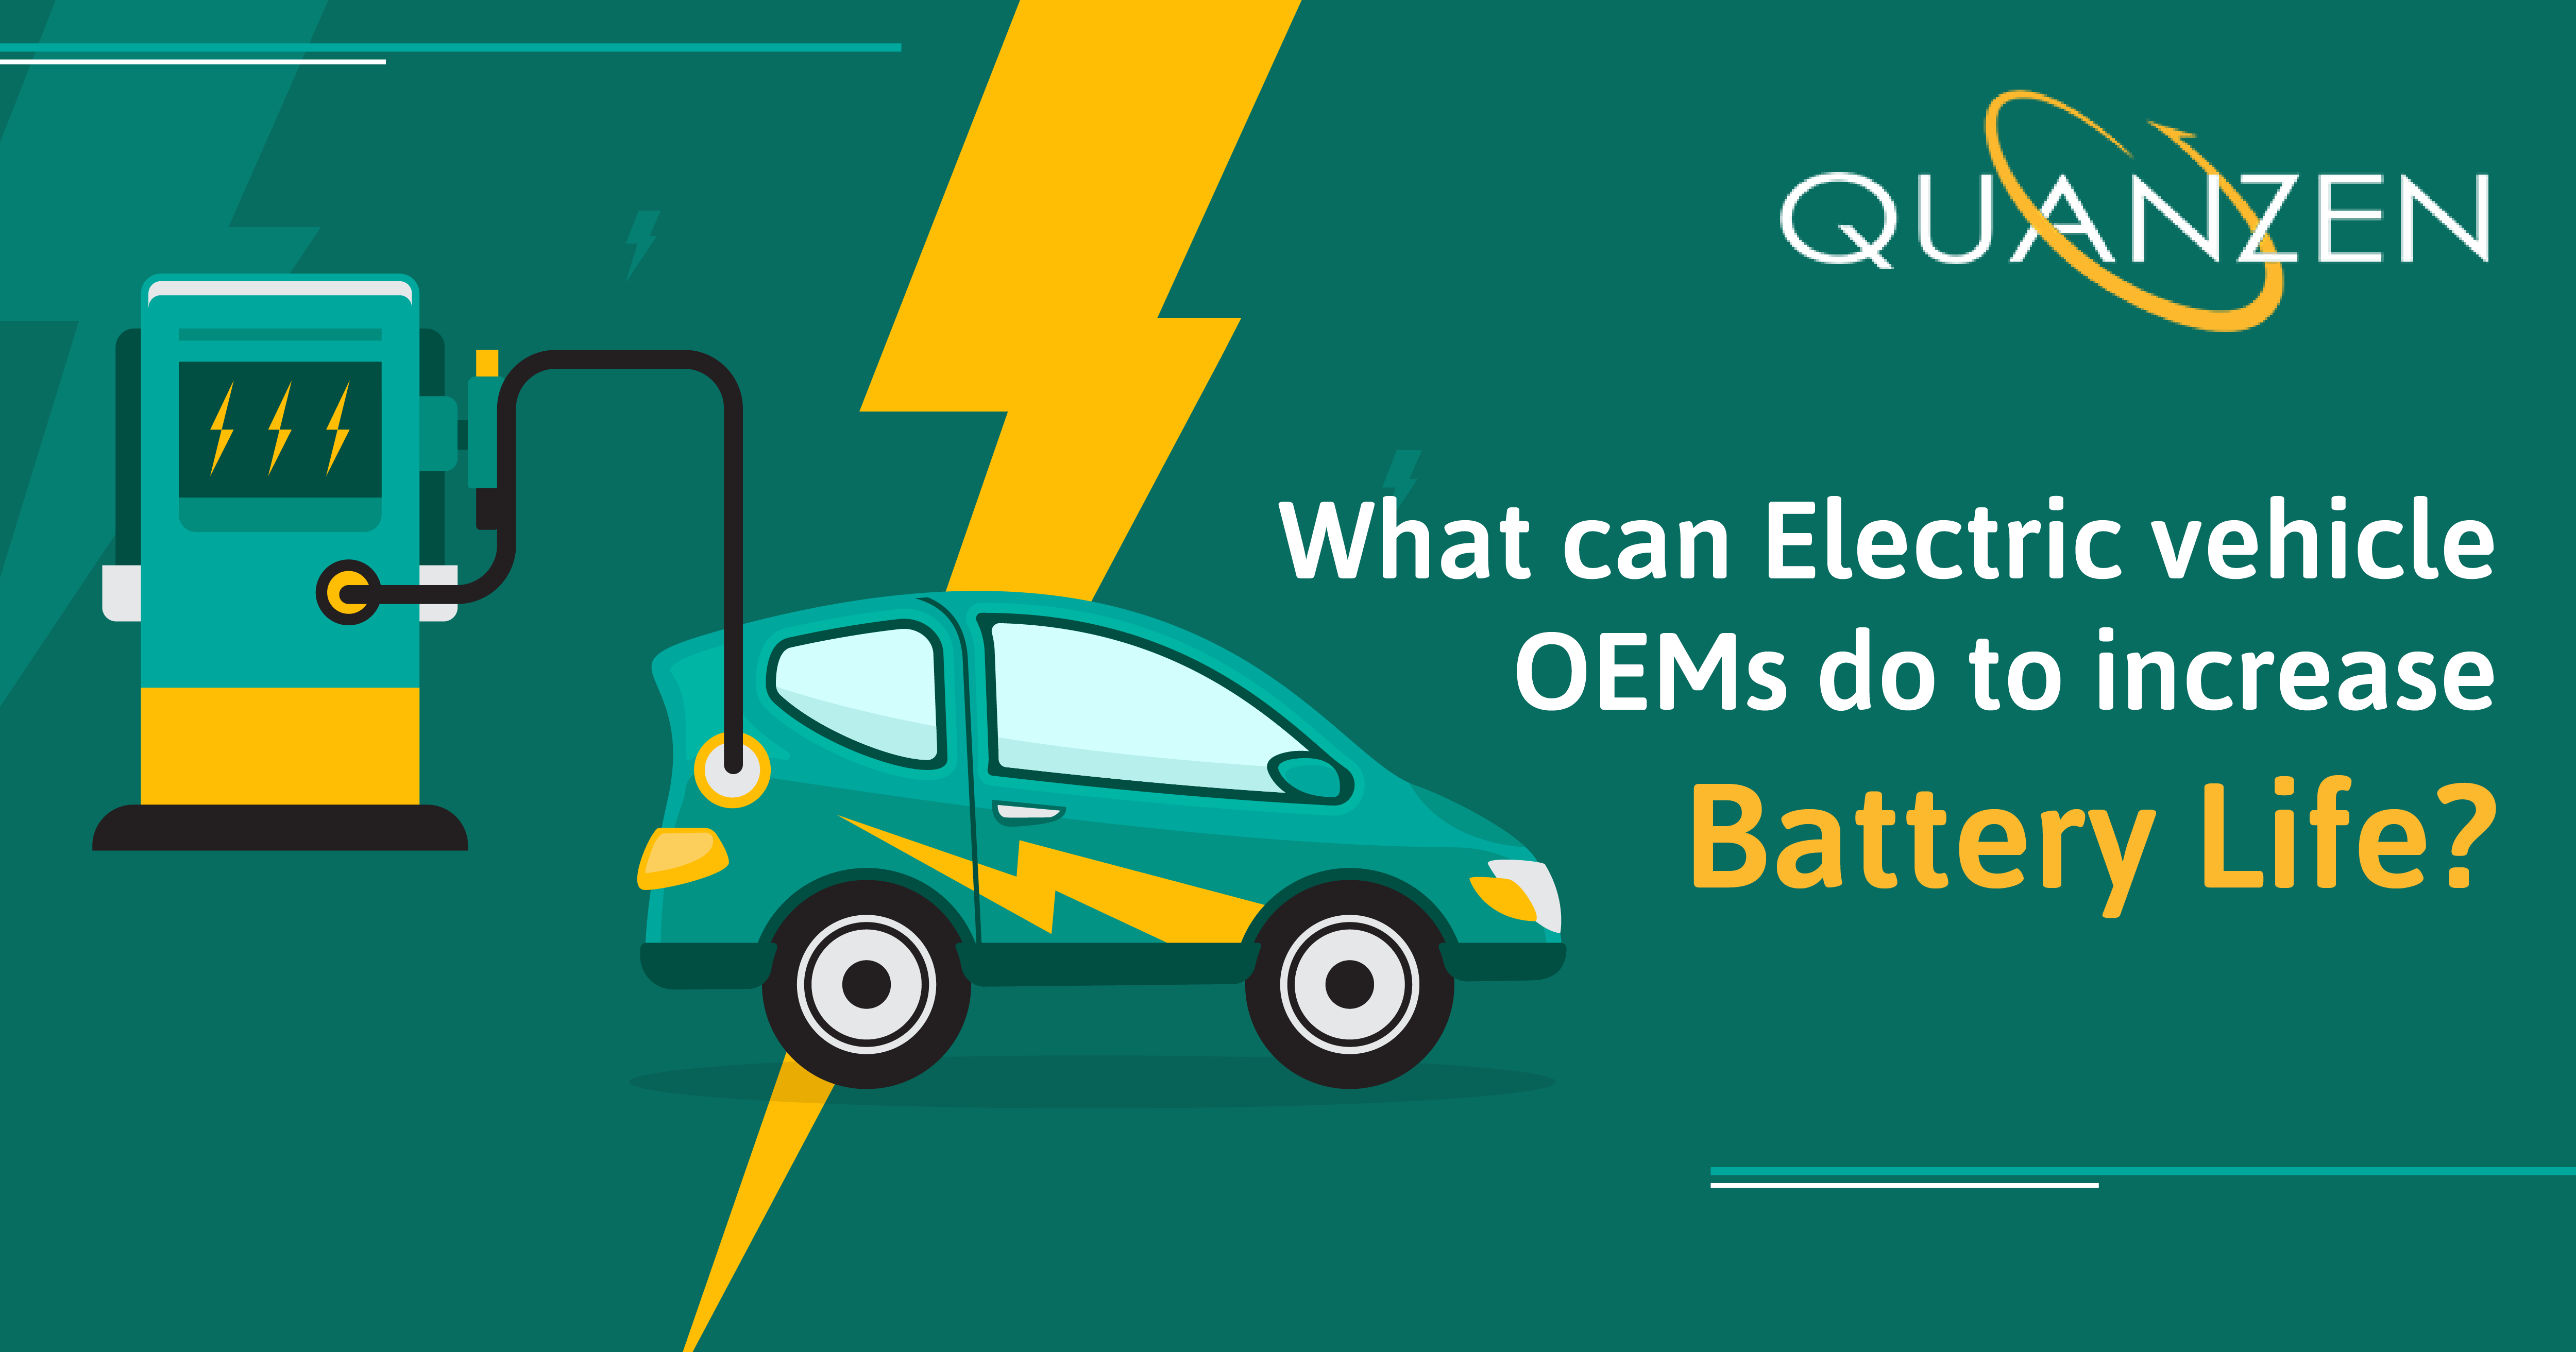 What can Electric vehicle OEMs do to increase battery life? Quanzen